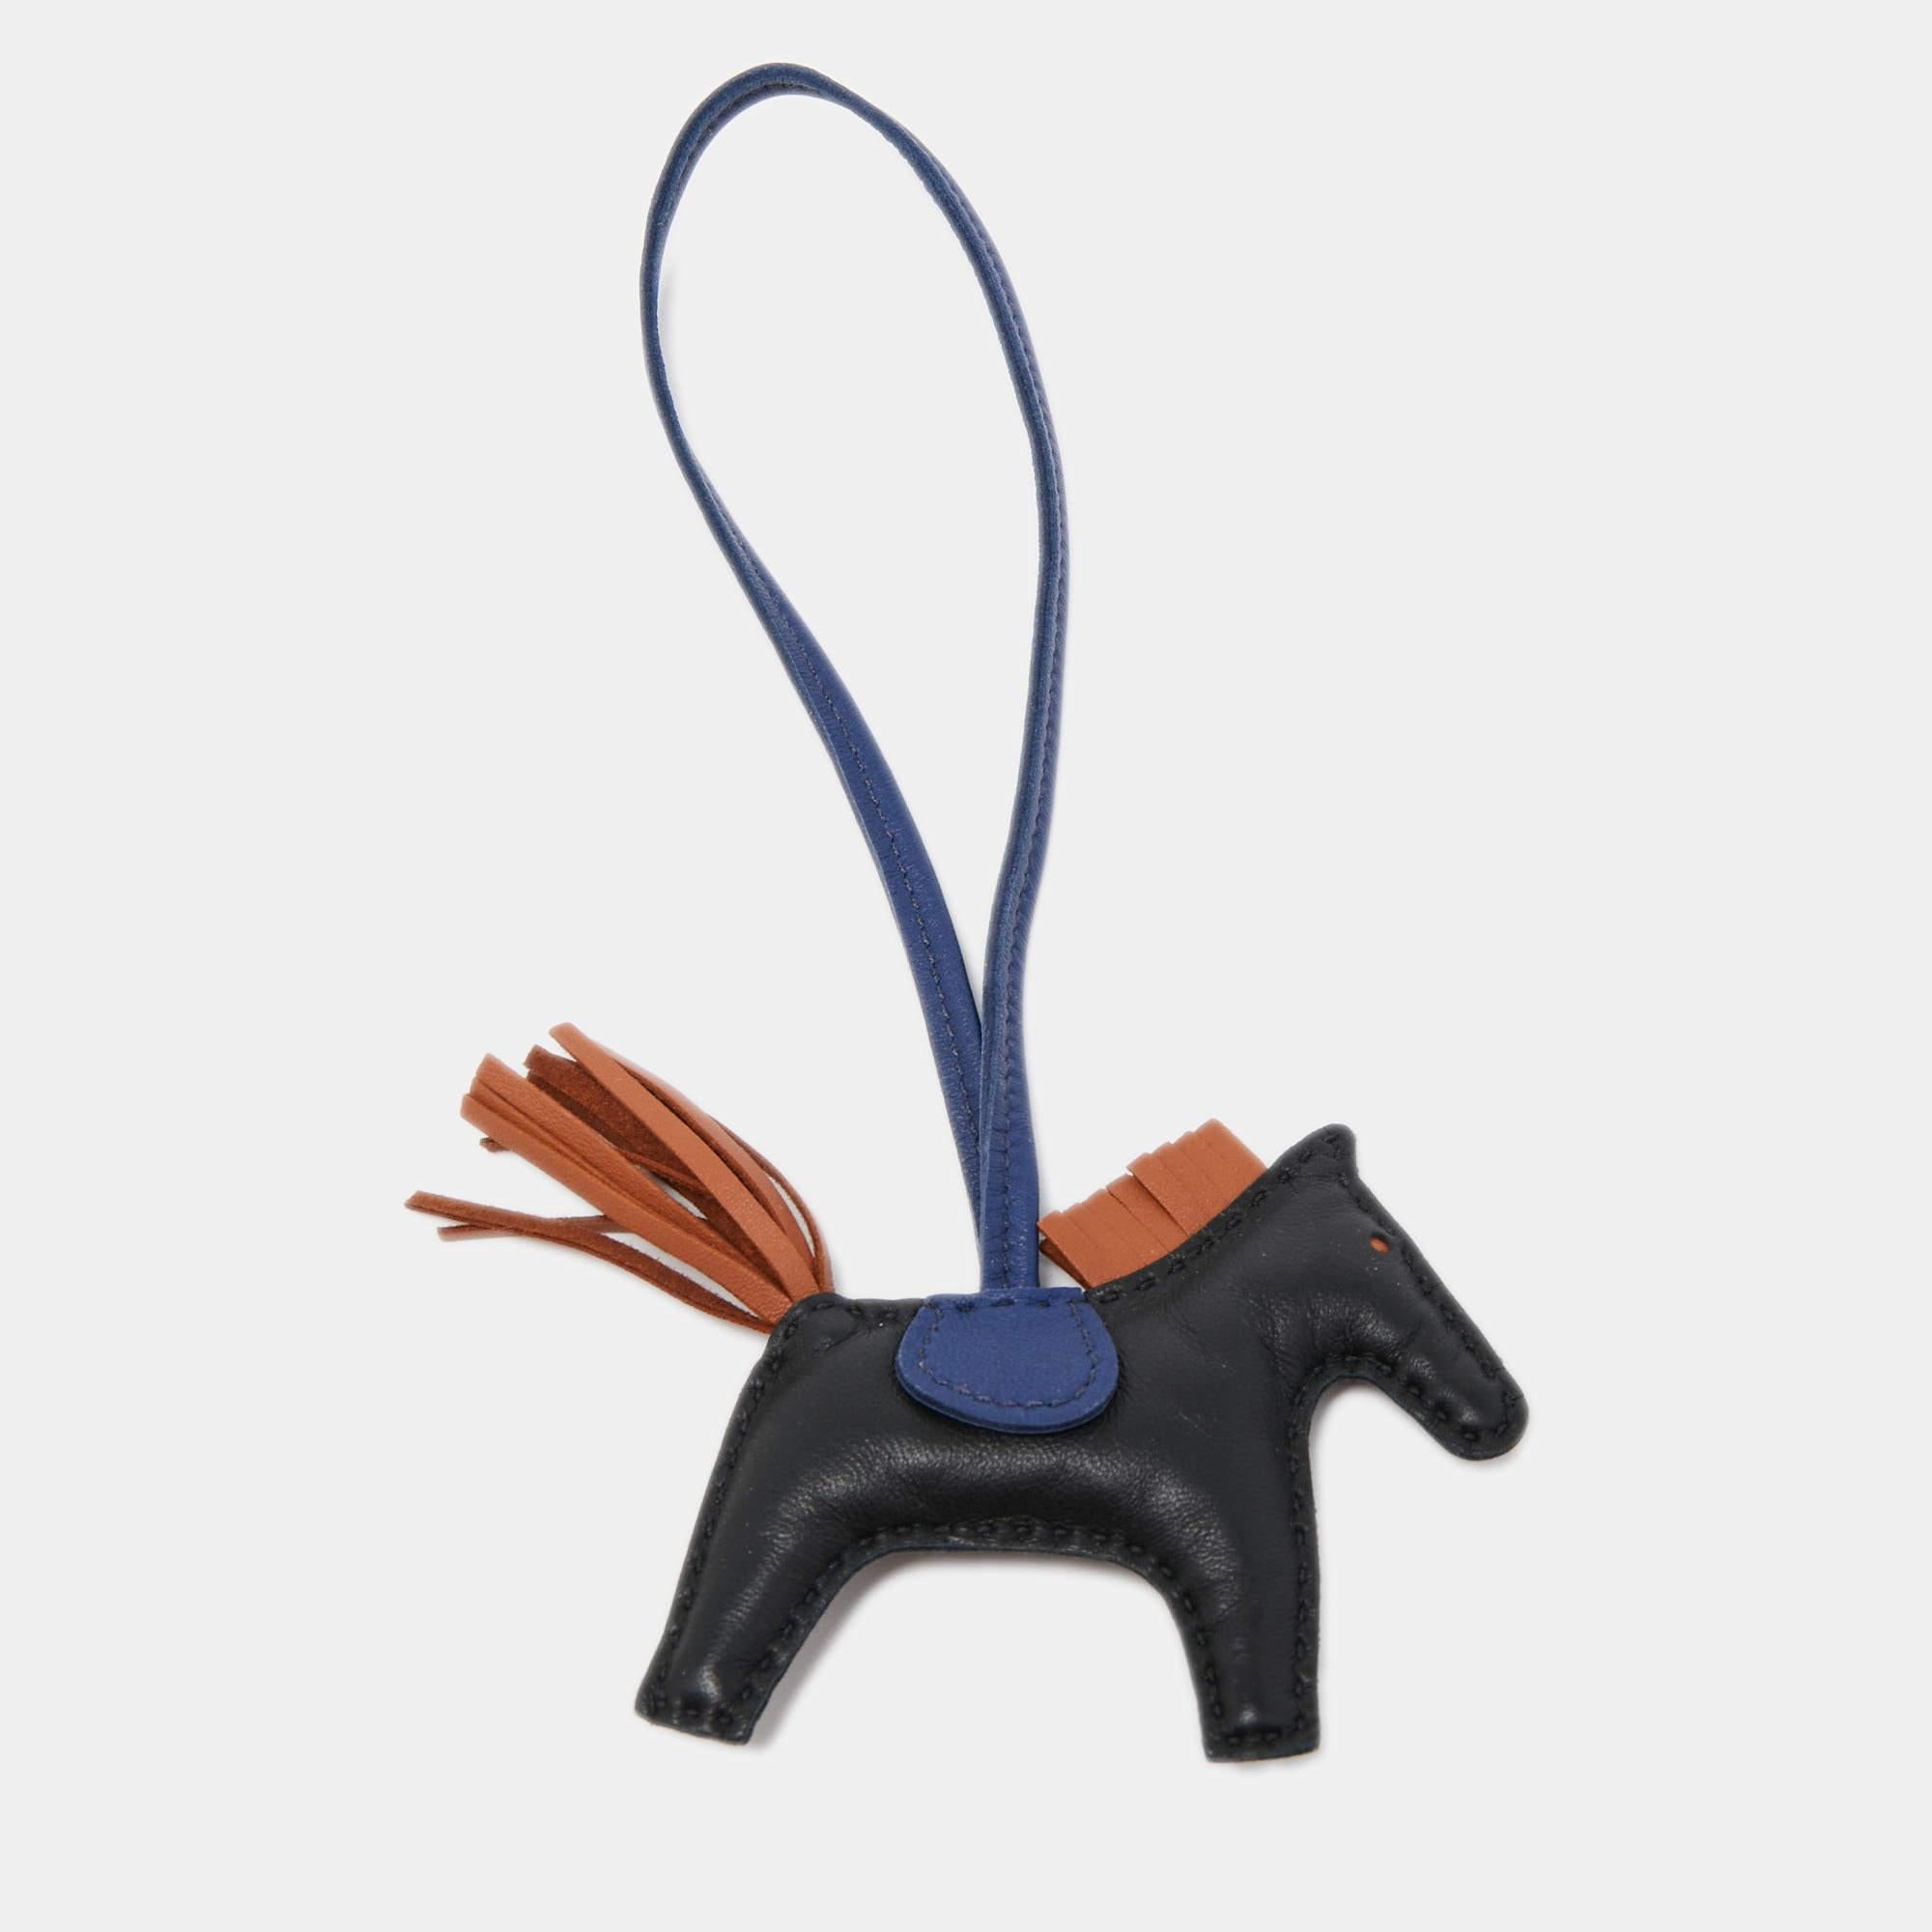 Rodeo bag charms by Hermès come close to being as rare as some of the brand's bags. Collected by fans of Hermès and handbags alike, these little galloping charms are dream pieces to dress up one's precious possessions. Hermès pays homage to its